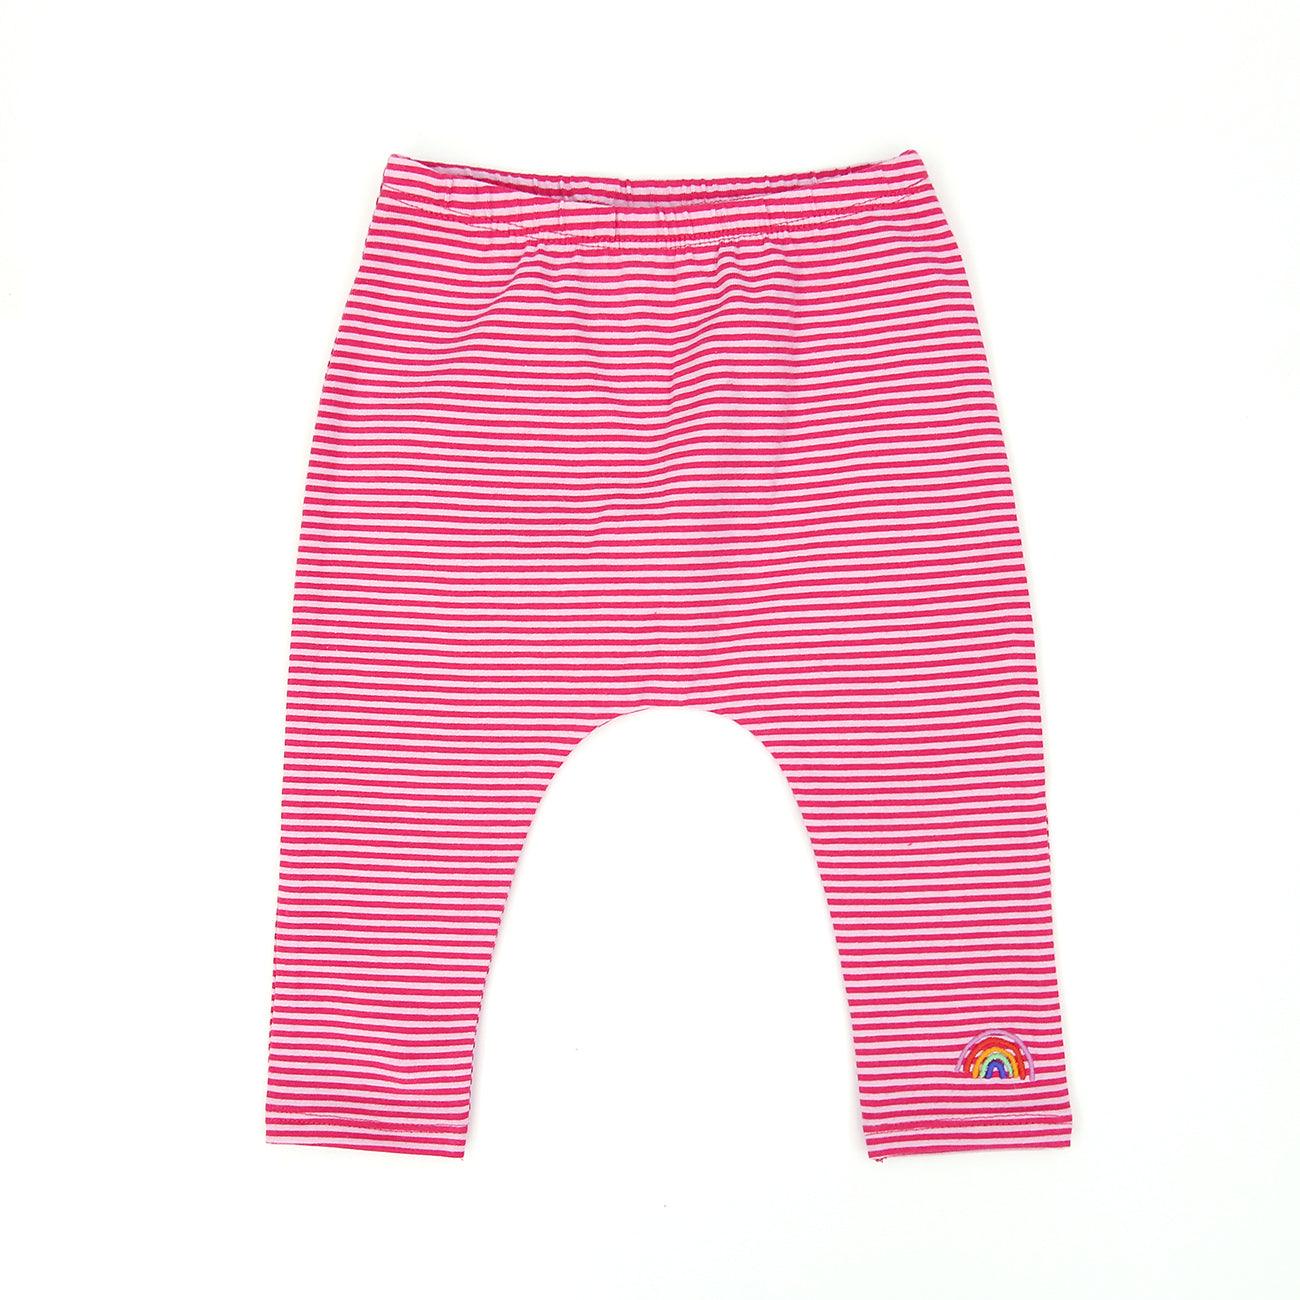 Imported Striped Printed Soft Cotton Legging For Girls 1 MONTH - 2-3 YRS (LE-11624) - Brands River